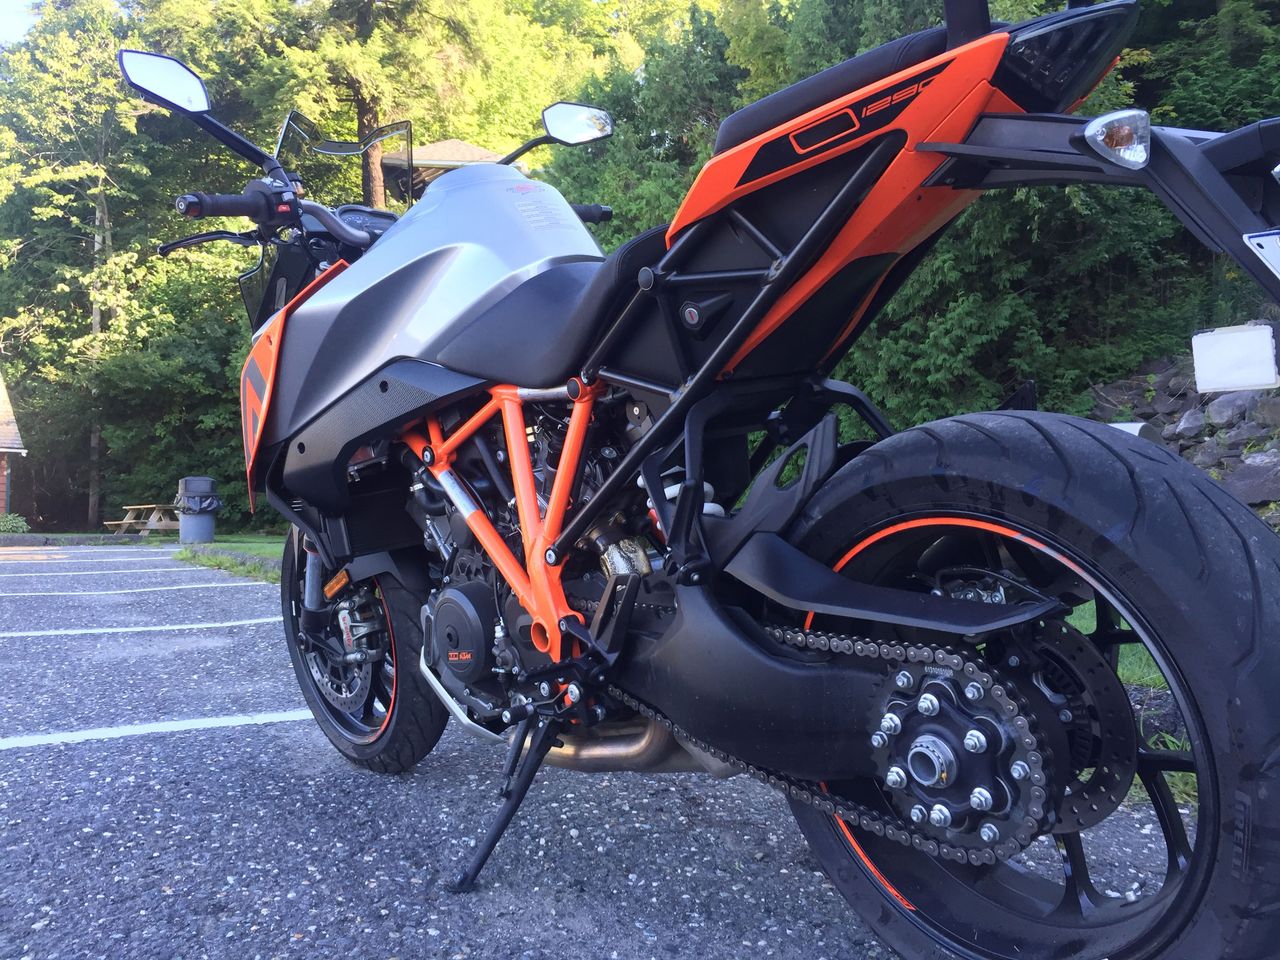 The GT is way more comfortable at speed than the Super Duke R, thanks to its broader fuel tank, which shields the rider’s legs, and its windscreen.